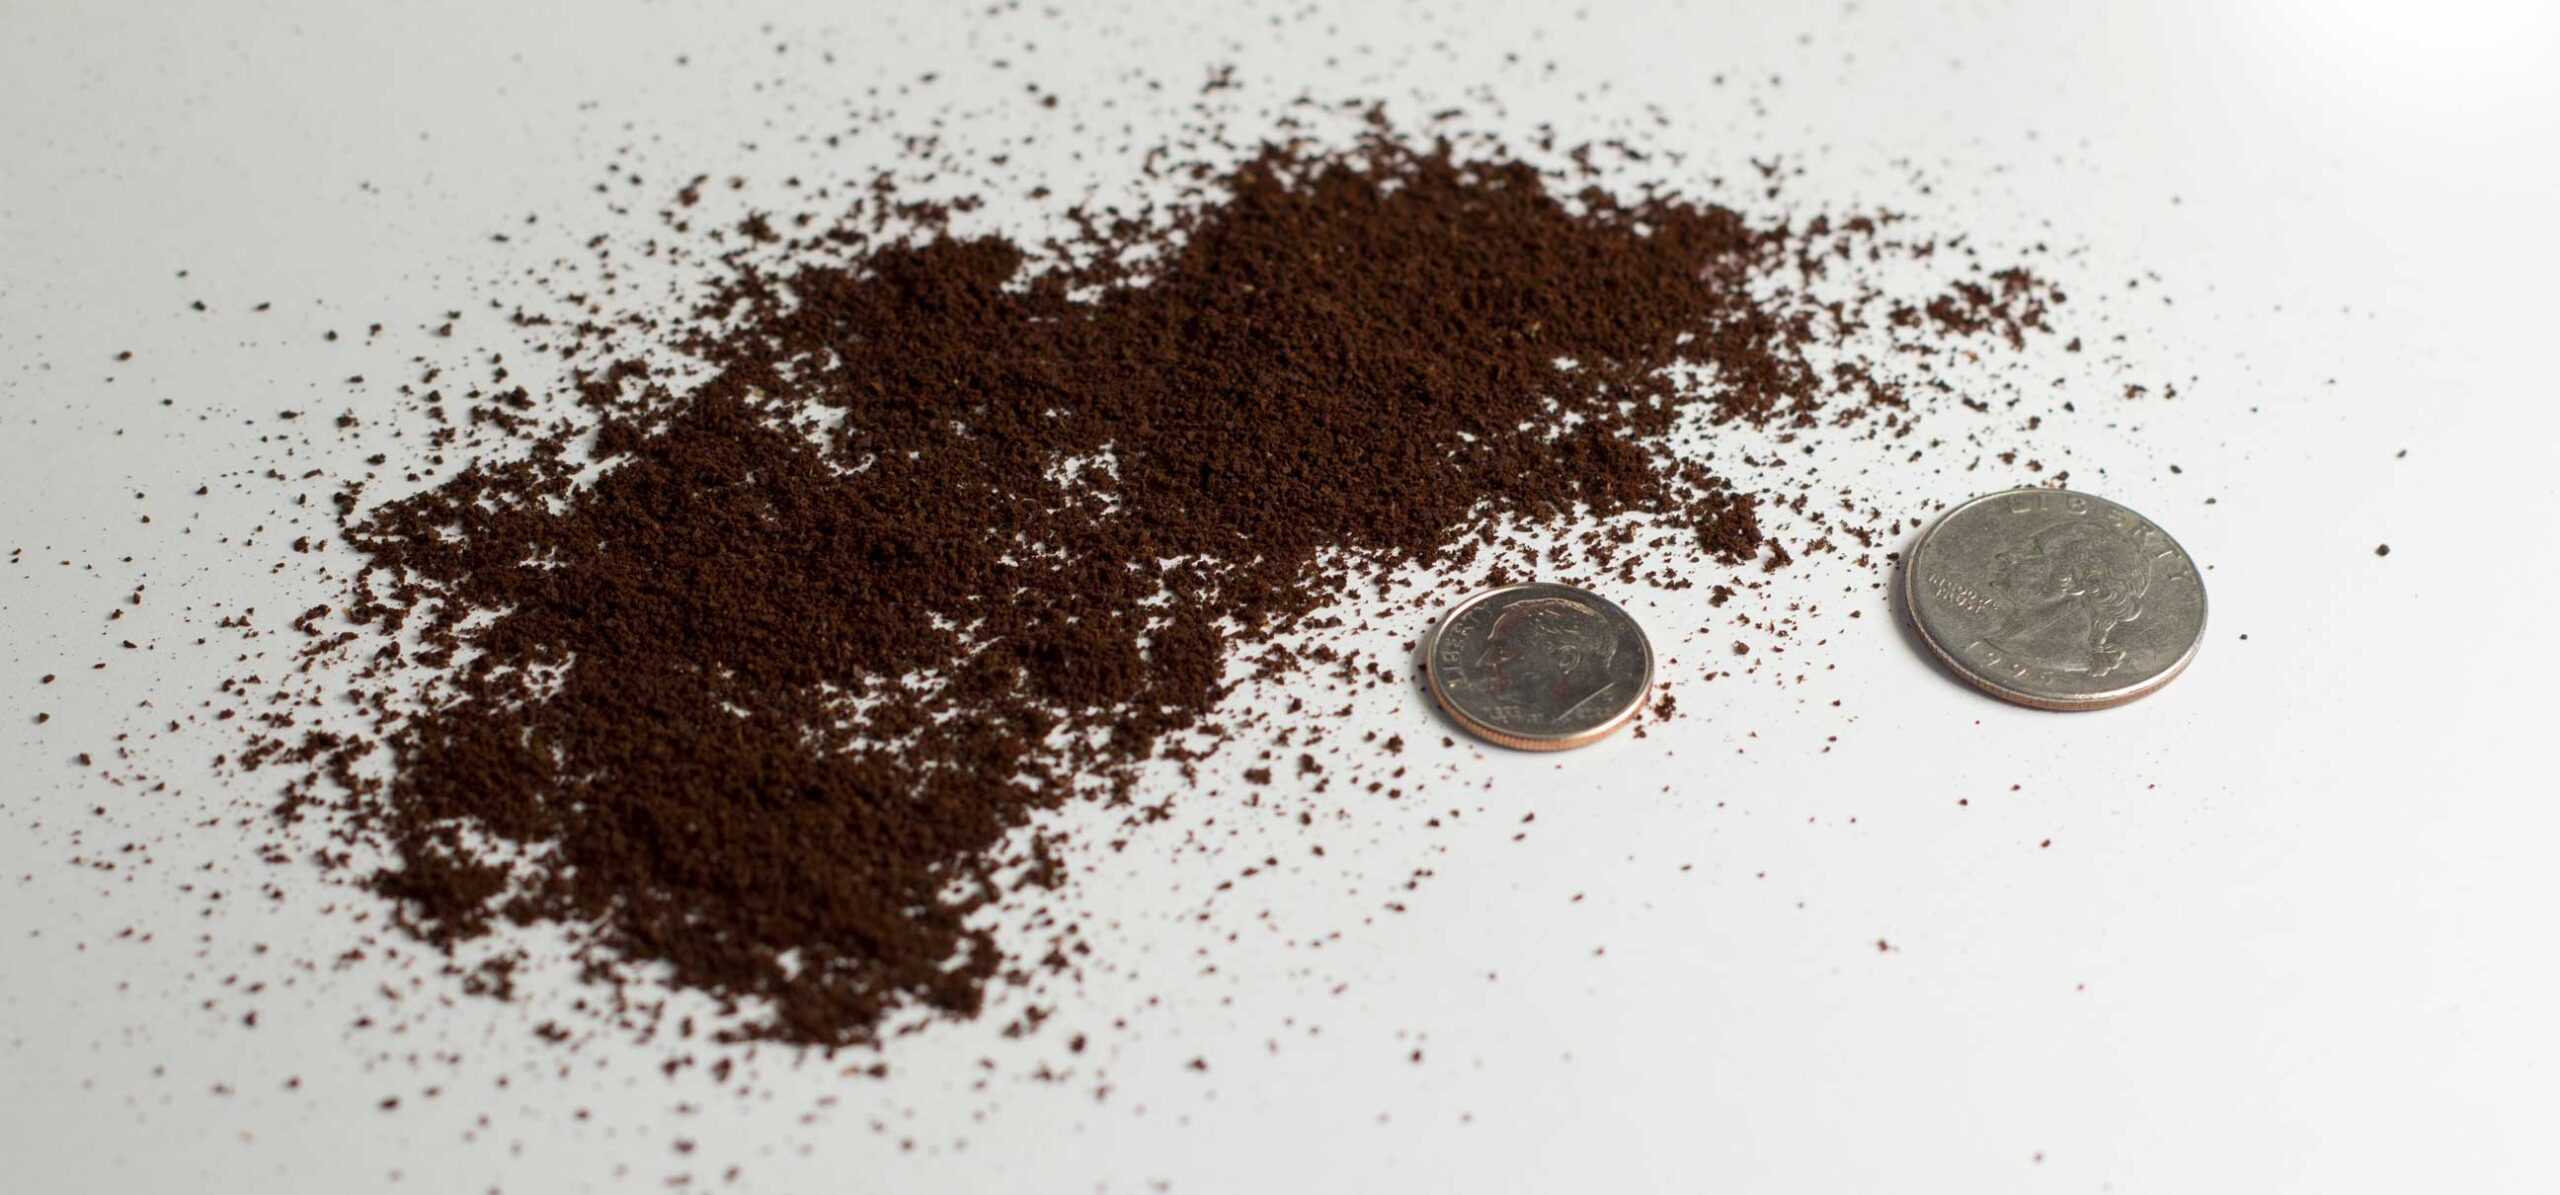 Finely ground coffee with evenly sized coffee granules, about the size for brewing espresso